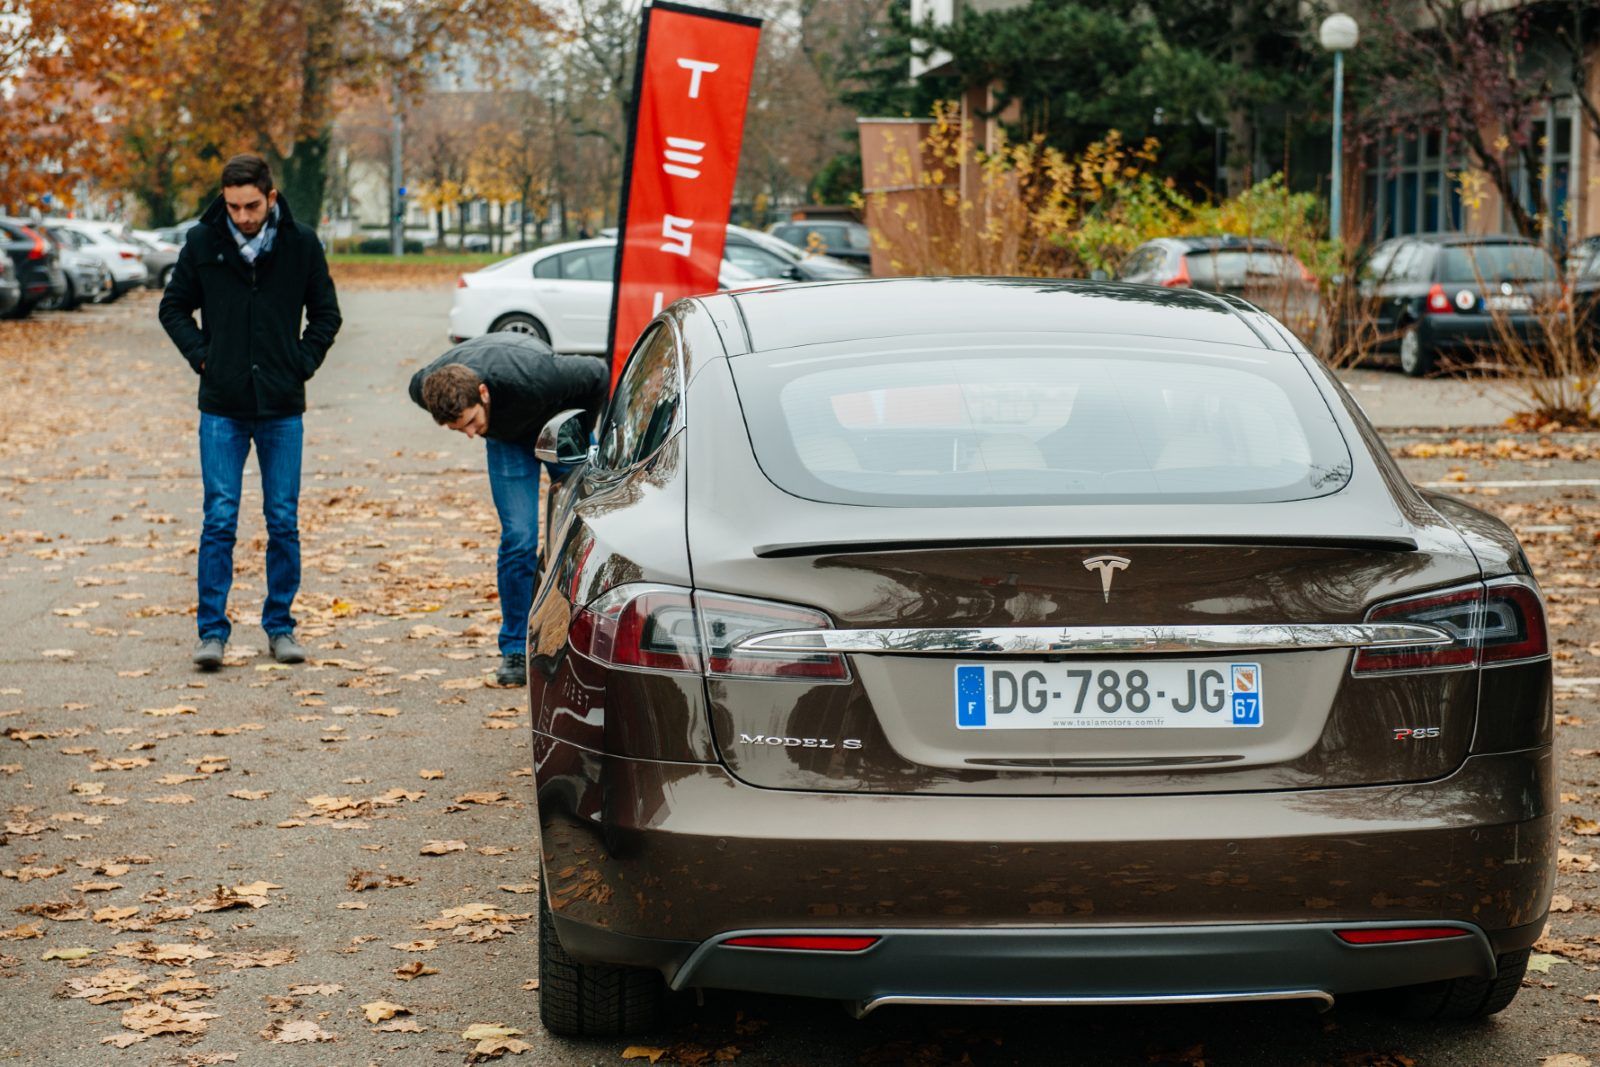 A brown Tesla Model S sits on a street in the autumn near a red Tesla flag - vehicle recalls